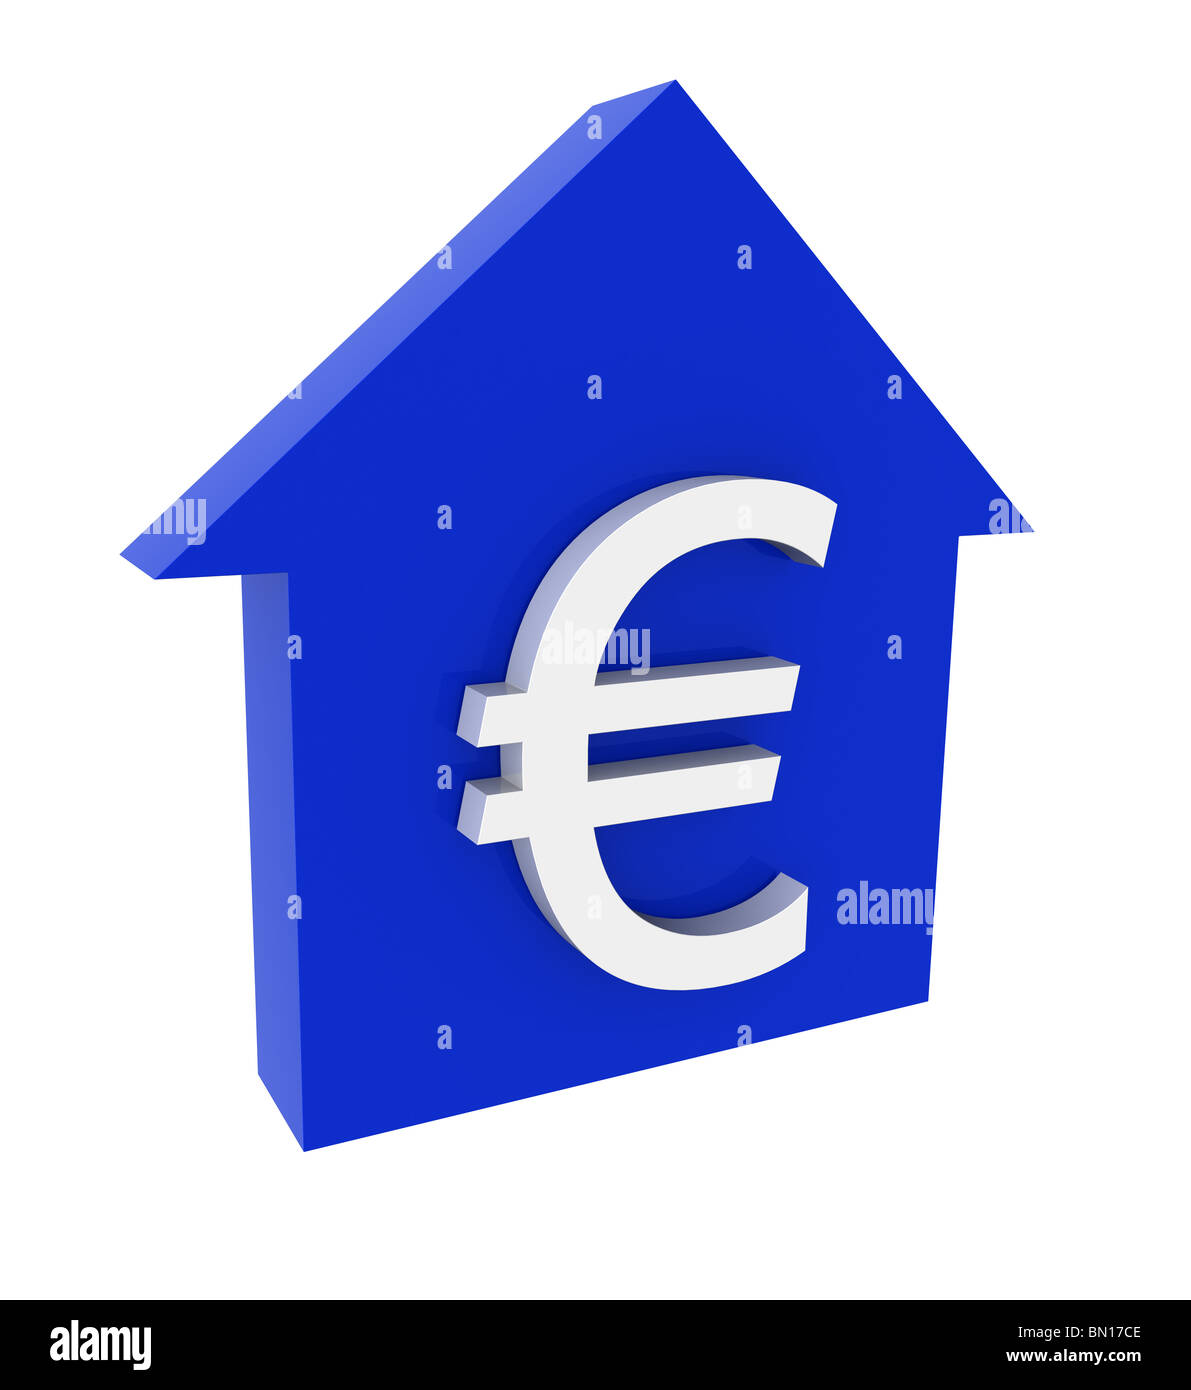 Three-dimensional model - a silhouette of a house and a mark of euro. Stock Photo